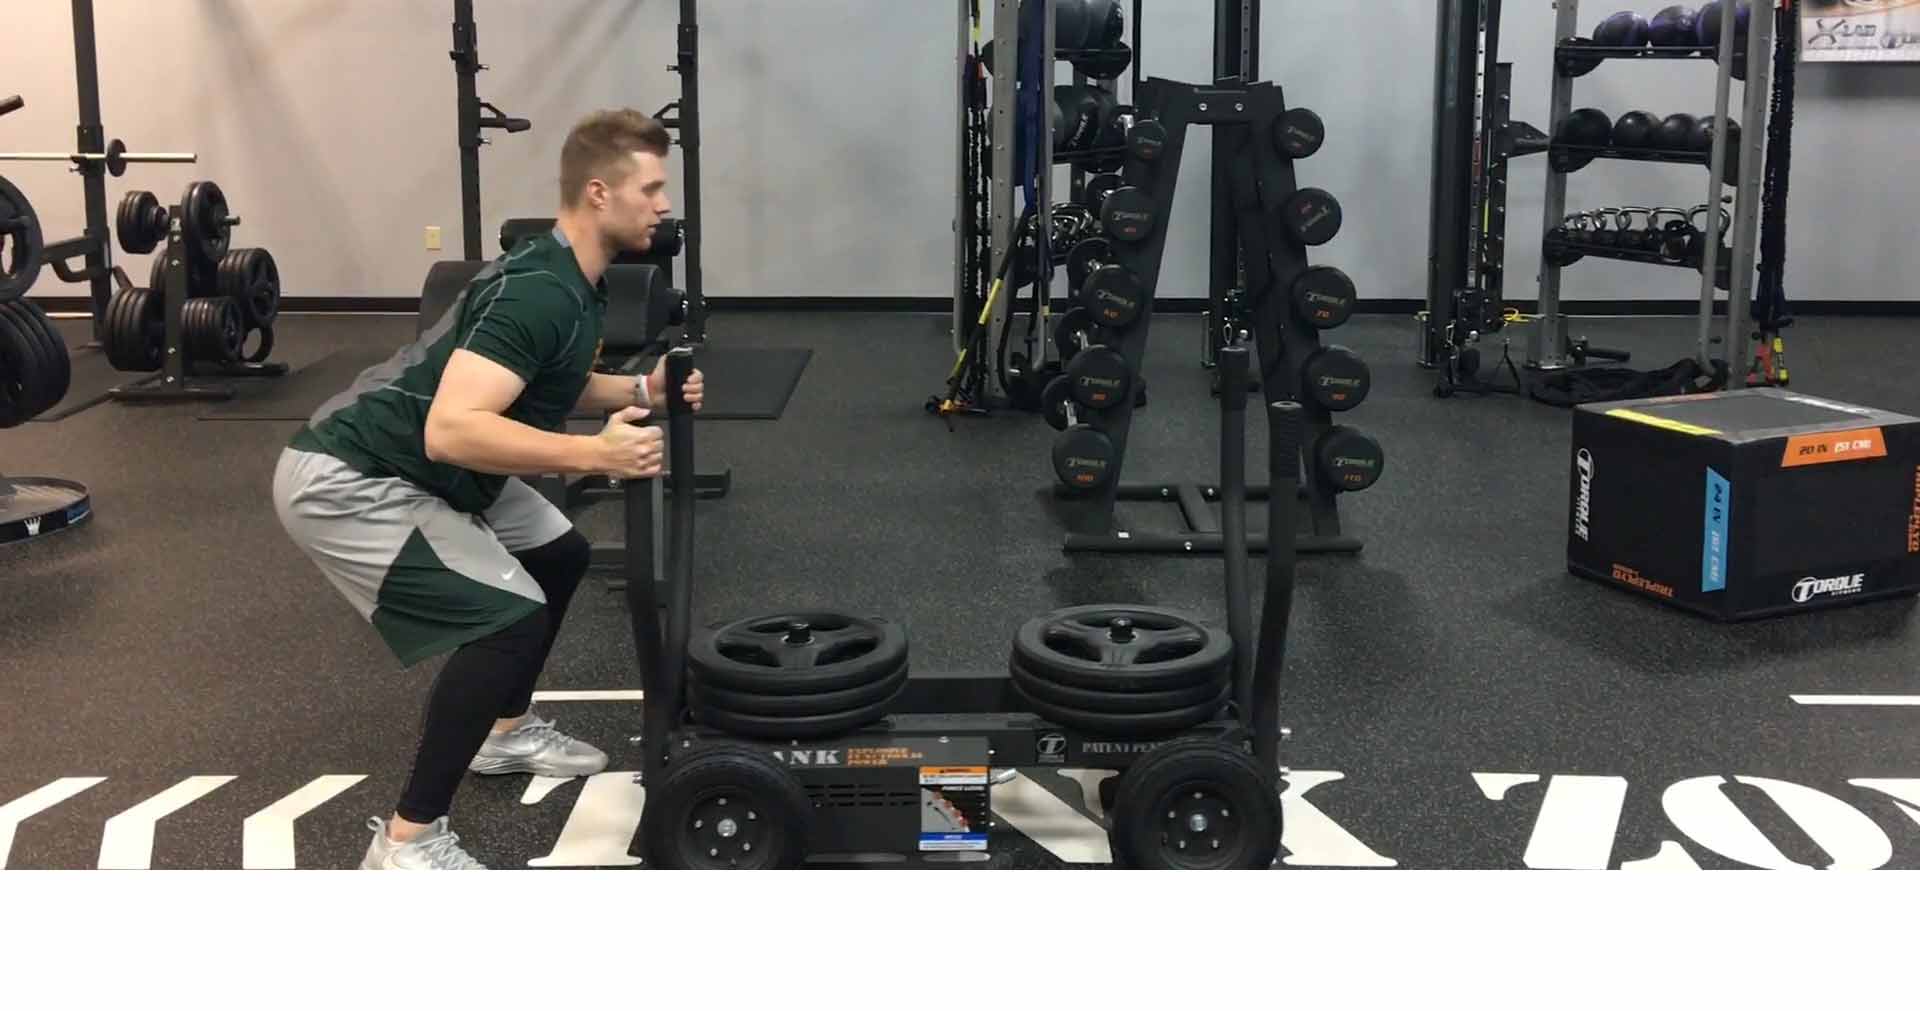 The Benefits of Rowing Exercises for Baseball with Logan Shore